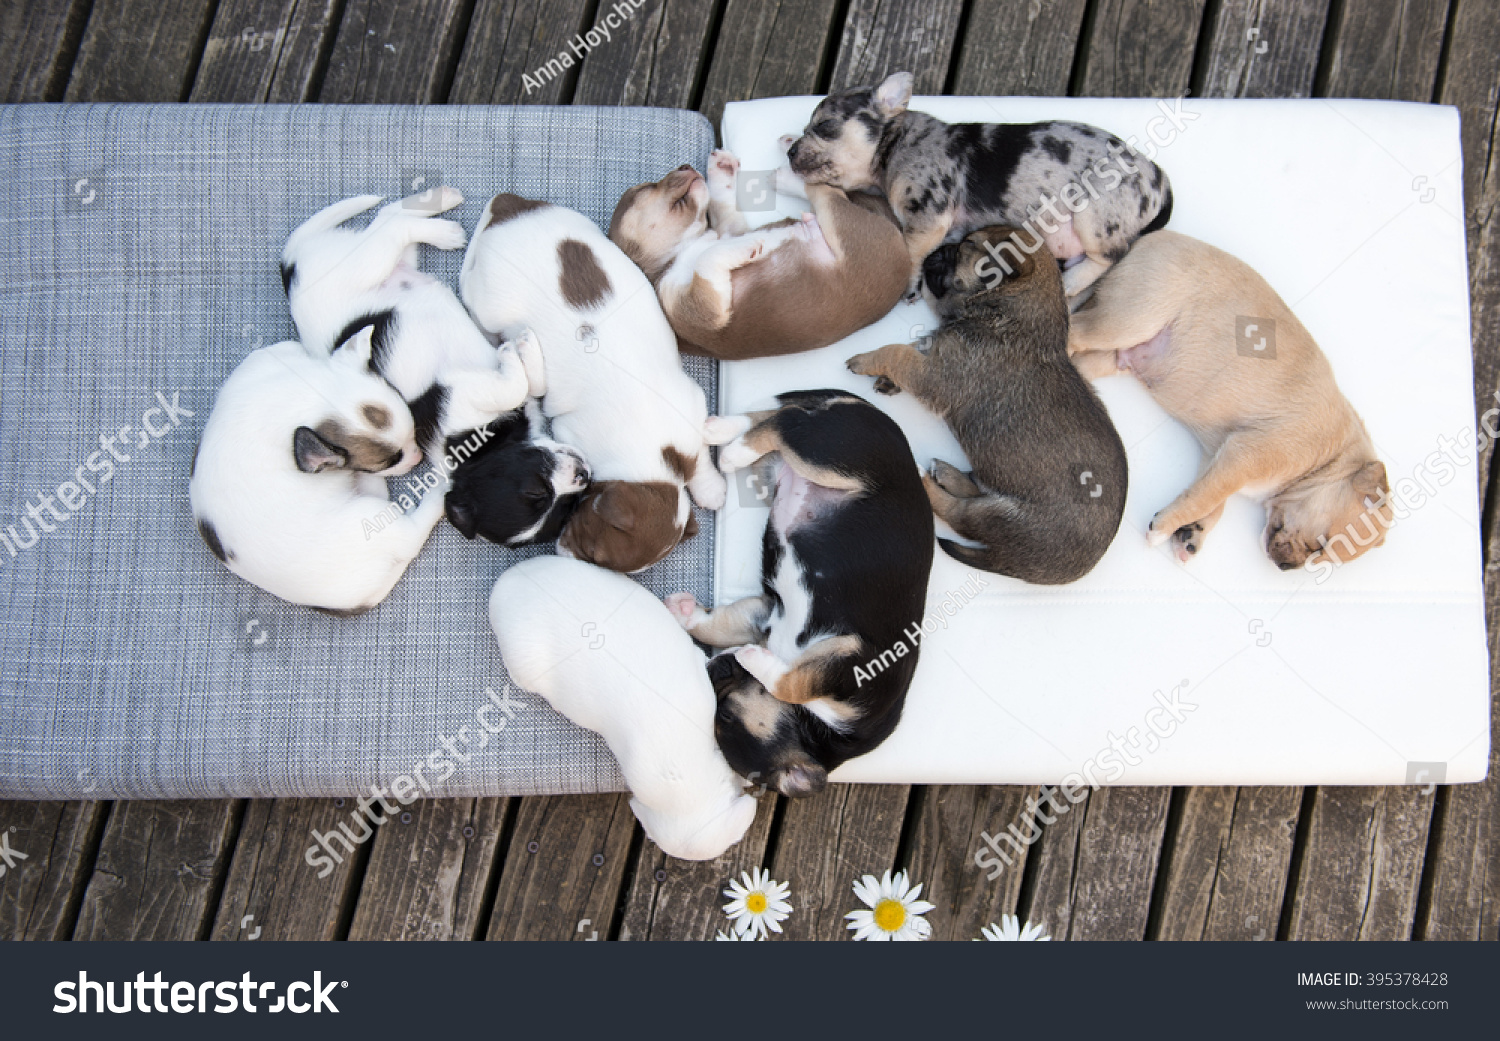 Small Mixed Breed Puppies Sleeping in Dog Pile Outside #395378428